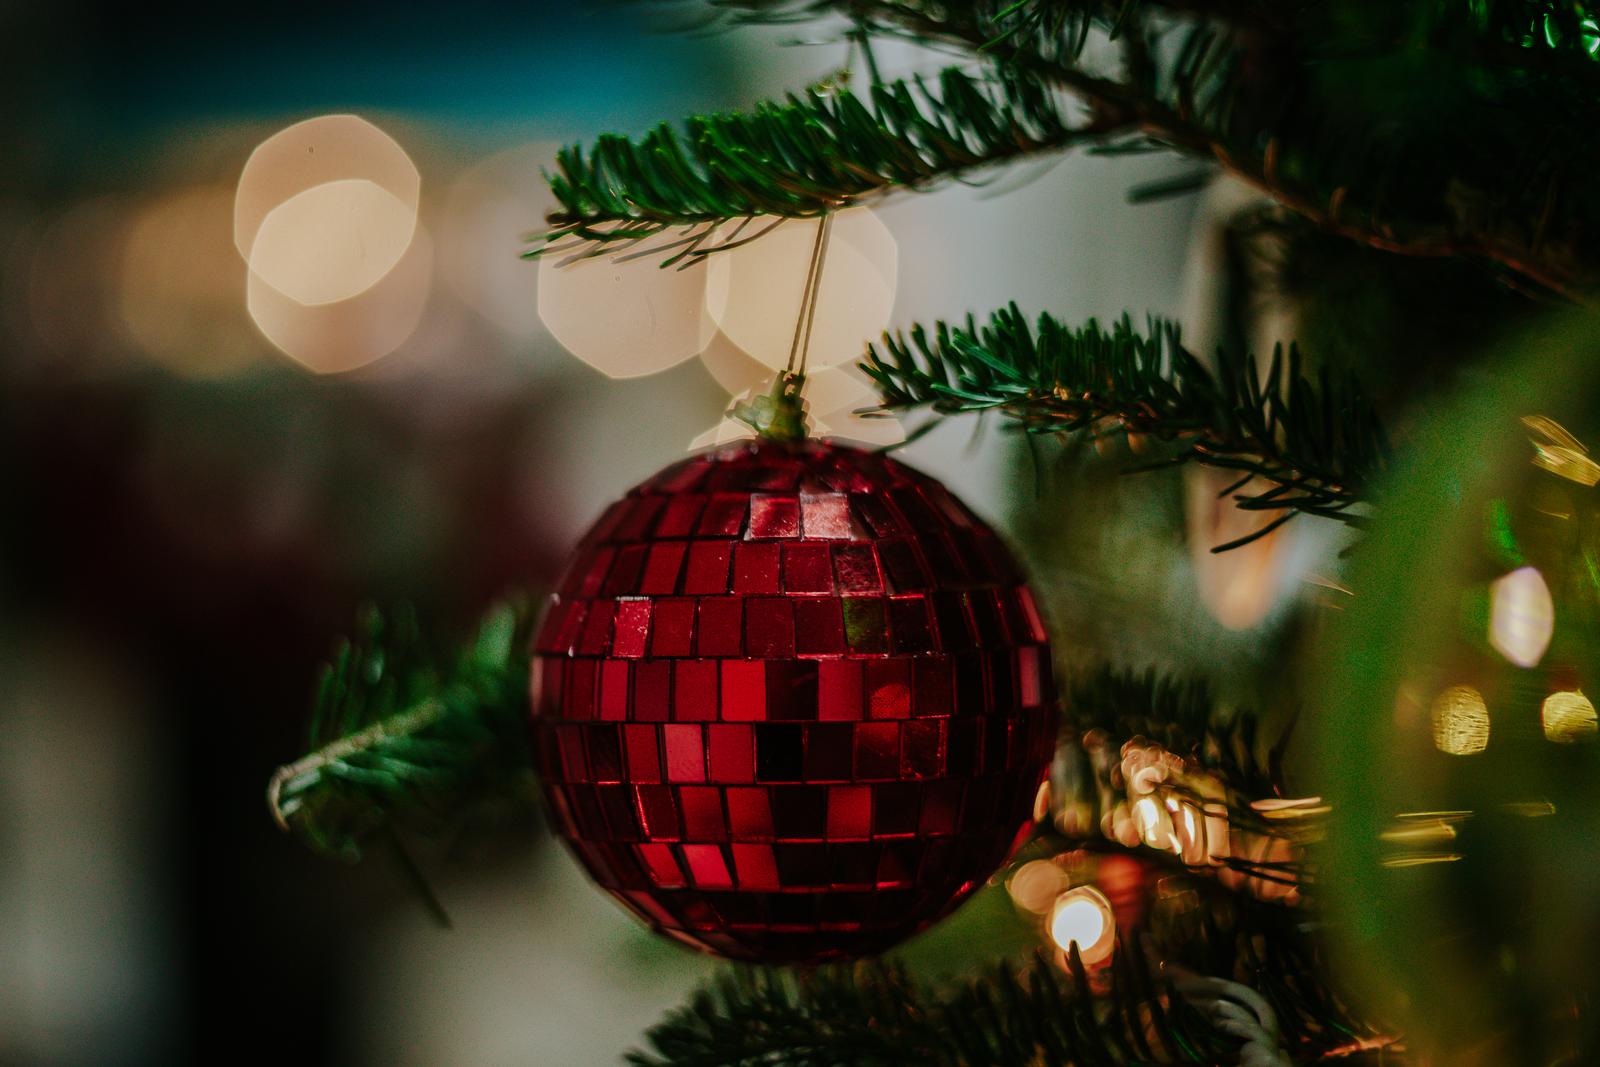 It’s Time to Find Out If You’re More Logical or Emotional With This “This or That” Game Christmas Tree Decorations Disco ball